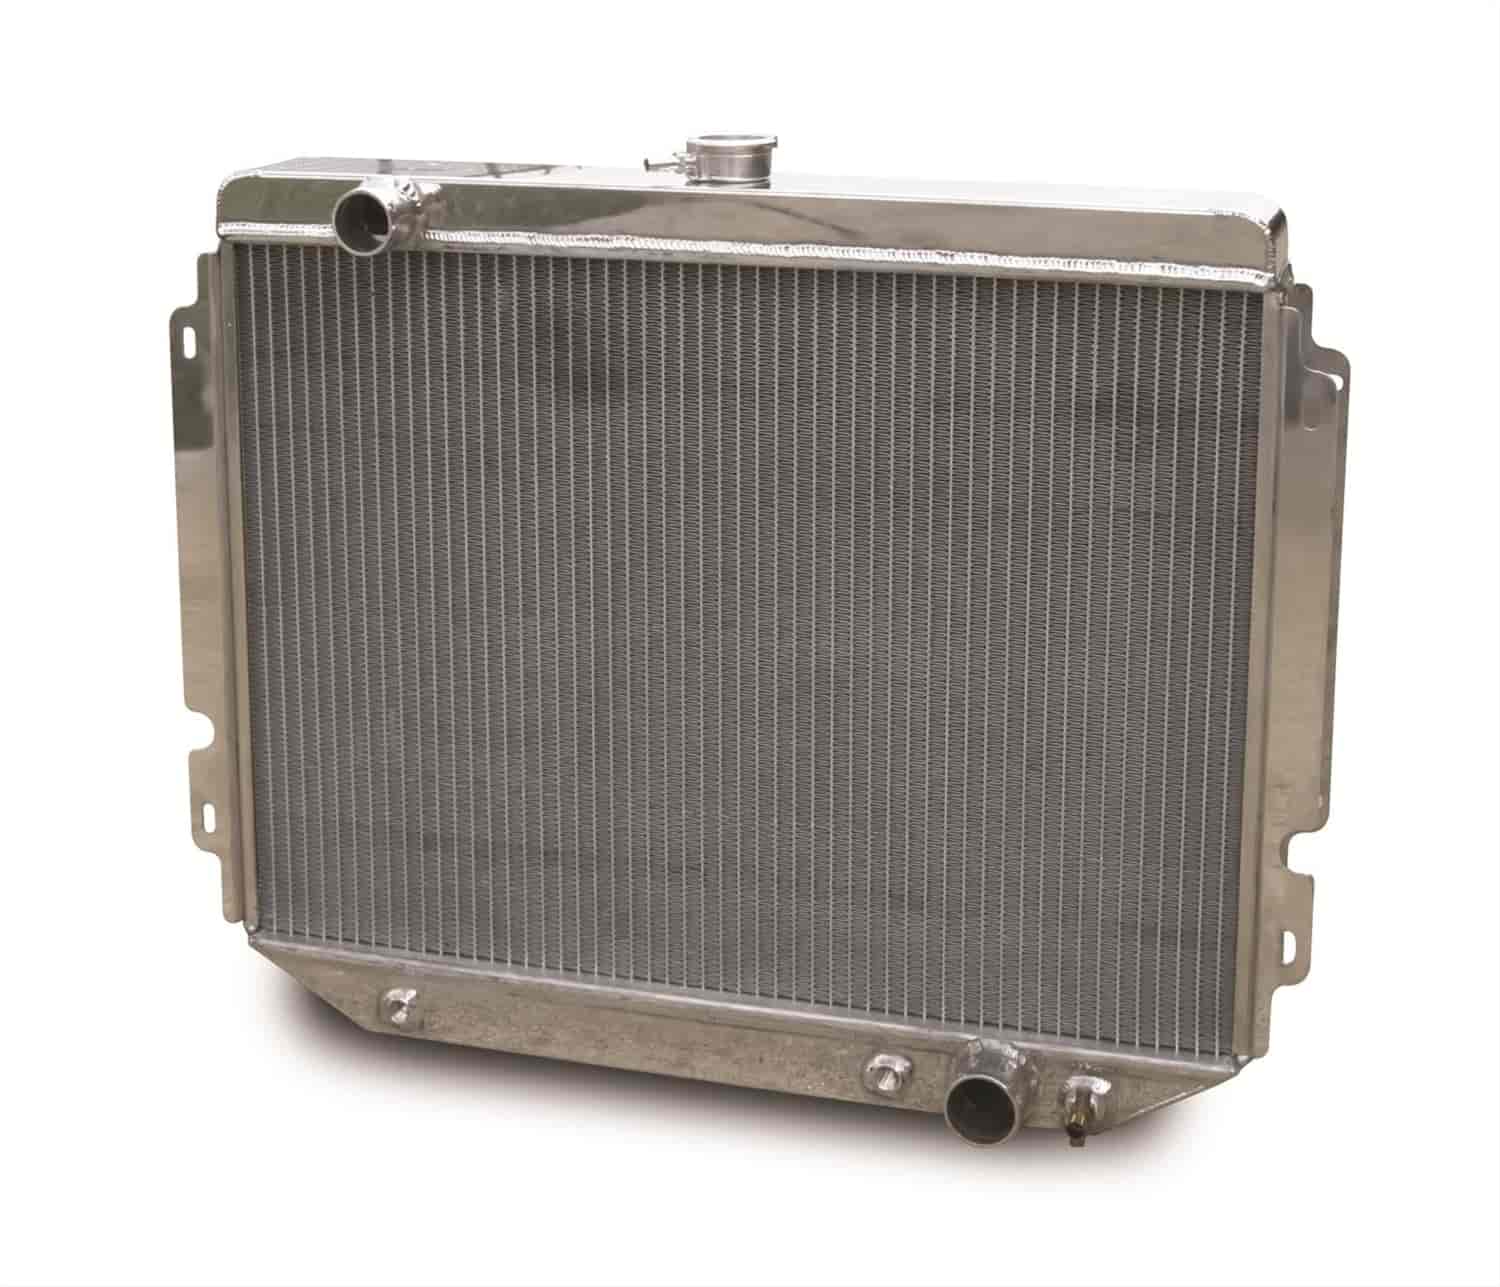 Direct-Fit Polished Aluminum Radiator [1966-1967 Chevy Chevelle] Small Block/Big Block V8